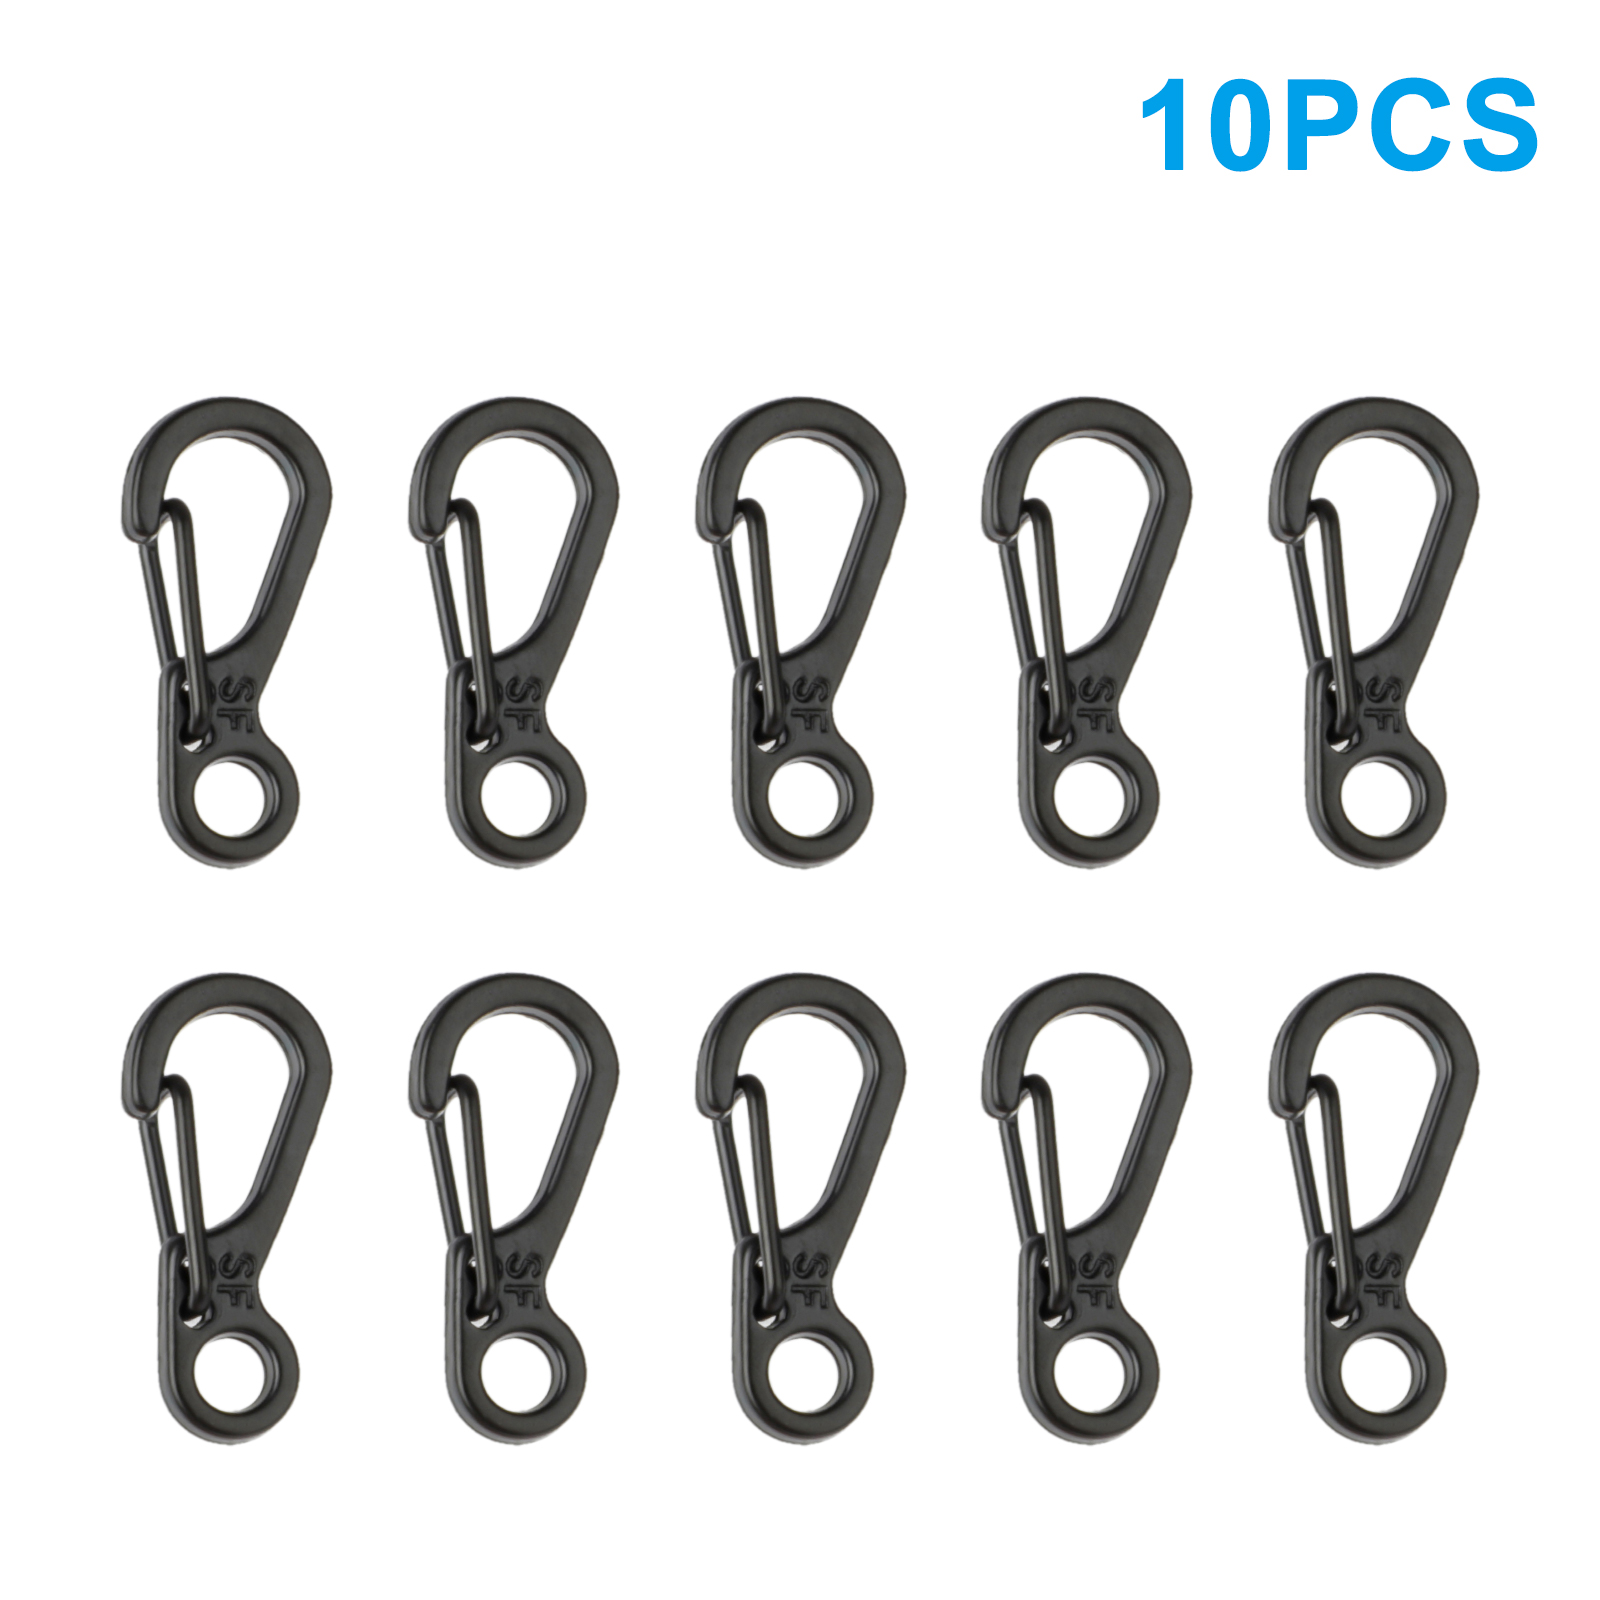 Details about   10x Mini Heavy Duty Aluminum Carabiner Key Chain Snap Hooks Clip Outdoor Camping 